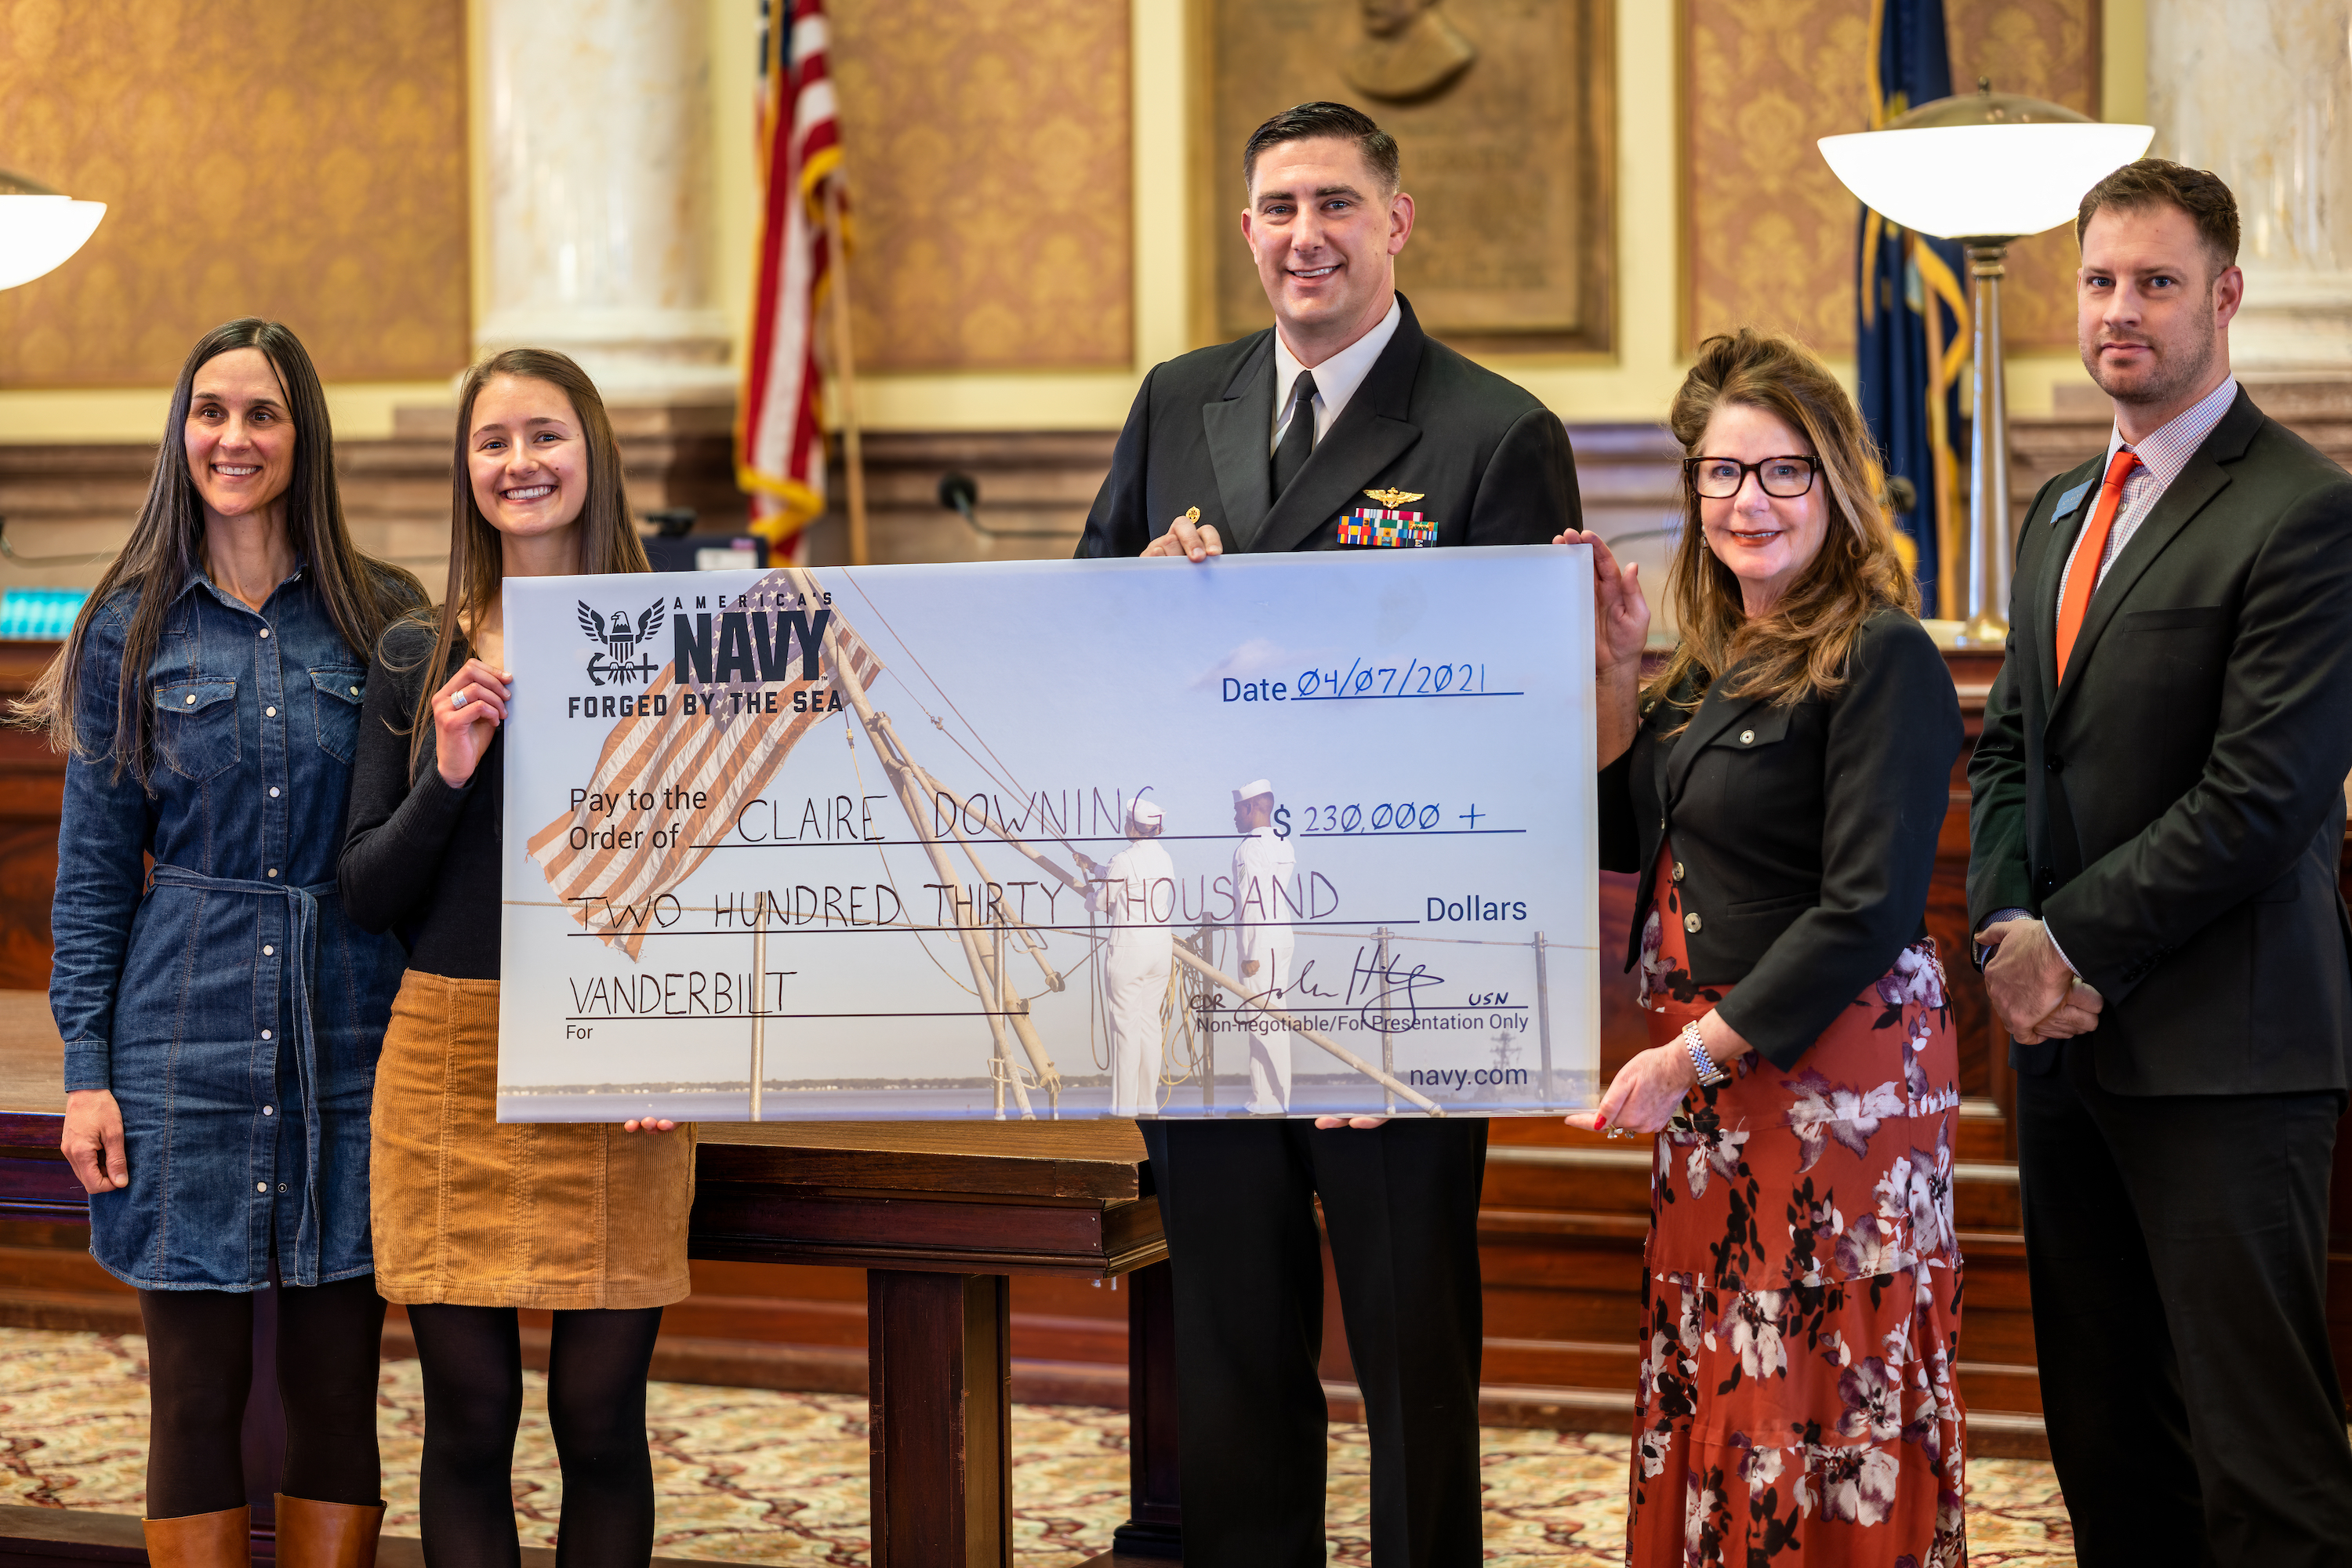 Claire Downing pictured with mother, Superintendent Elsie Arntzen, and  CDR John Hiltz, United States Navy Commanding Office, Navy Talent Acquisition Group Pacific Northwest